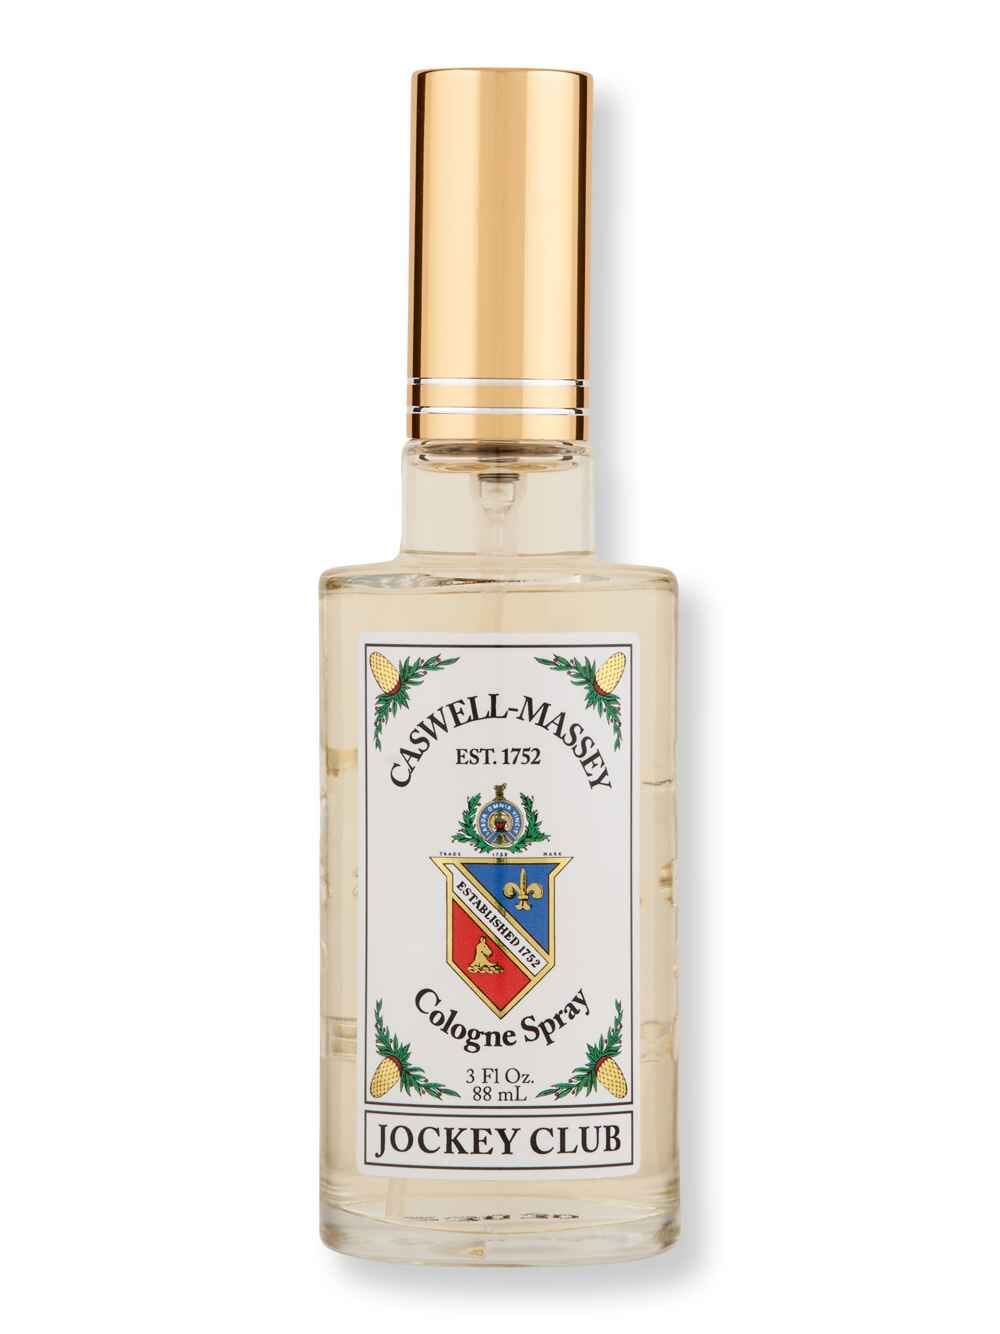 Caswell Massey Caswell Massey Jockey Club Cologne Perfumes & Colognes 